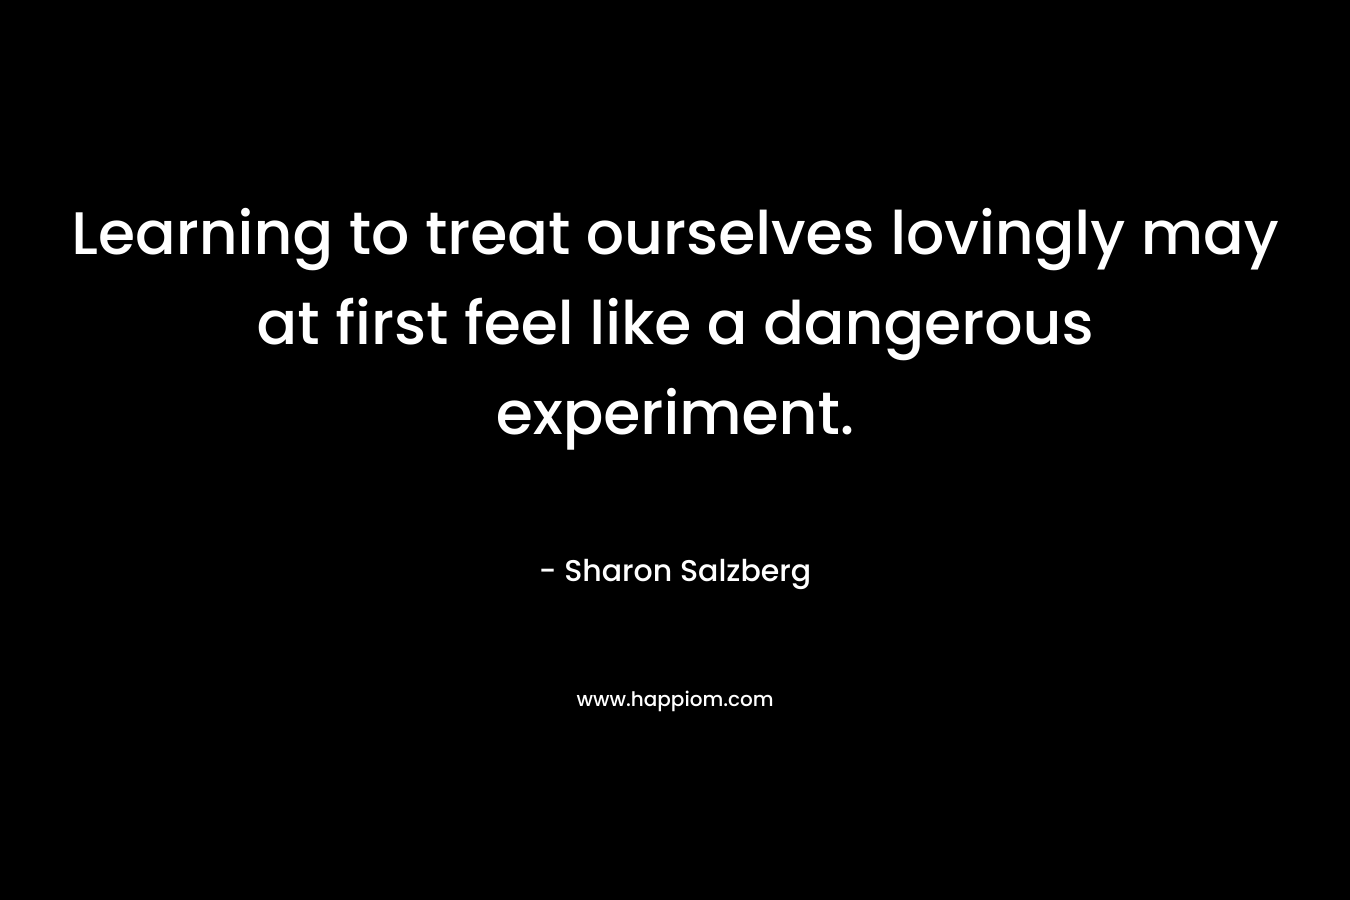 Learning to treat ourselves lovingly may at first feel like a dangerous experiment.